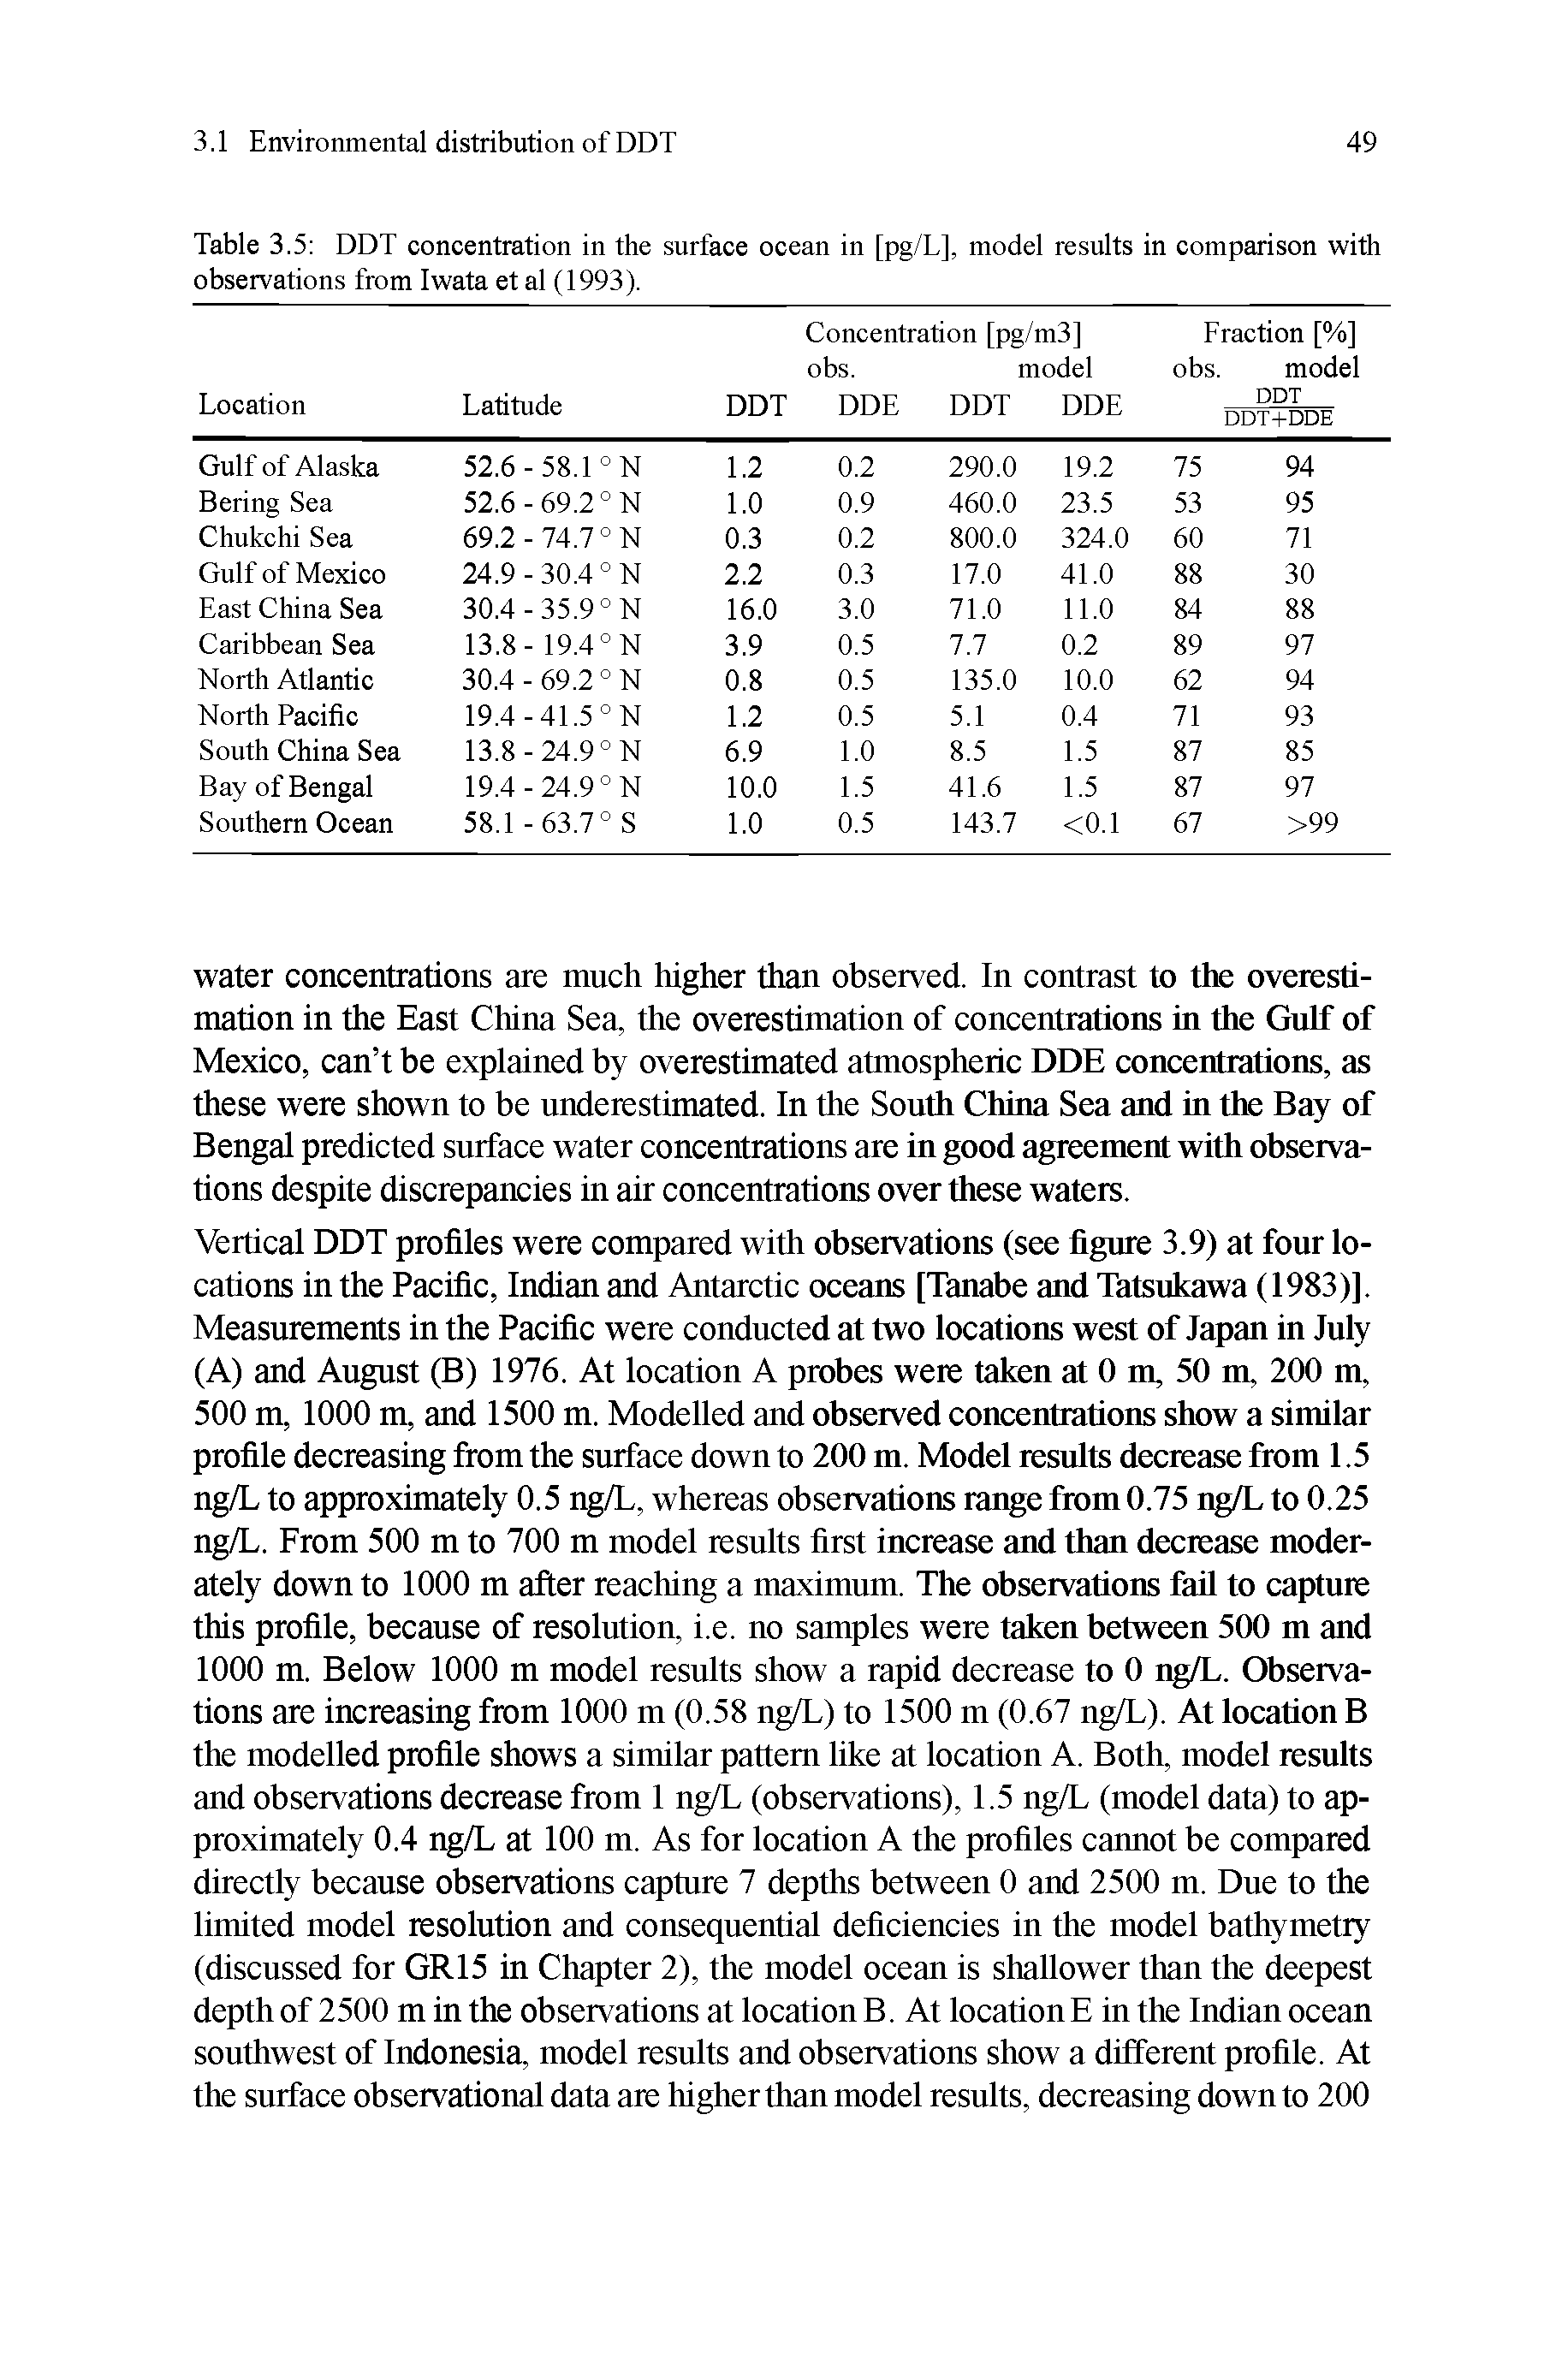 Table 3.5 DDT concentration in the surface ocean in [pg/L], model results in comparison with observations from Iwata et al (1993).